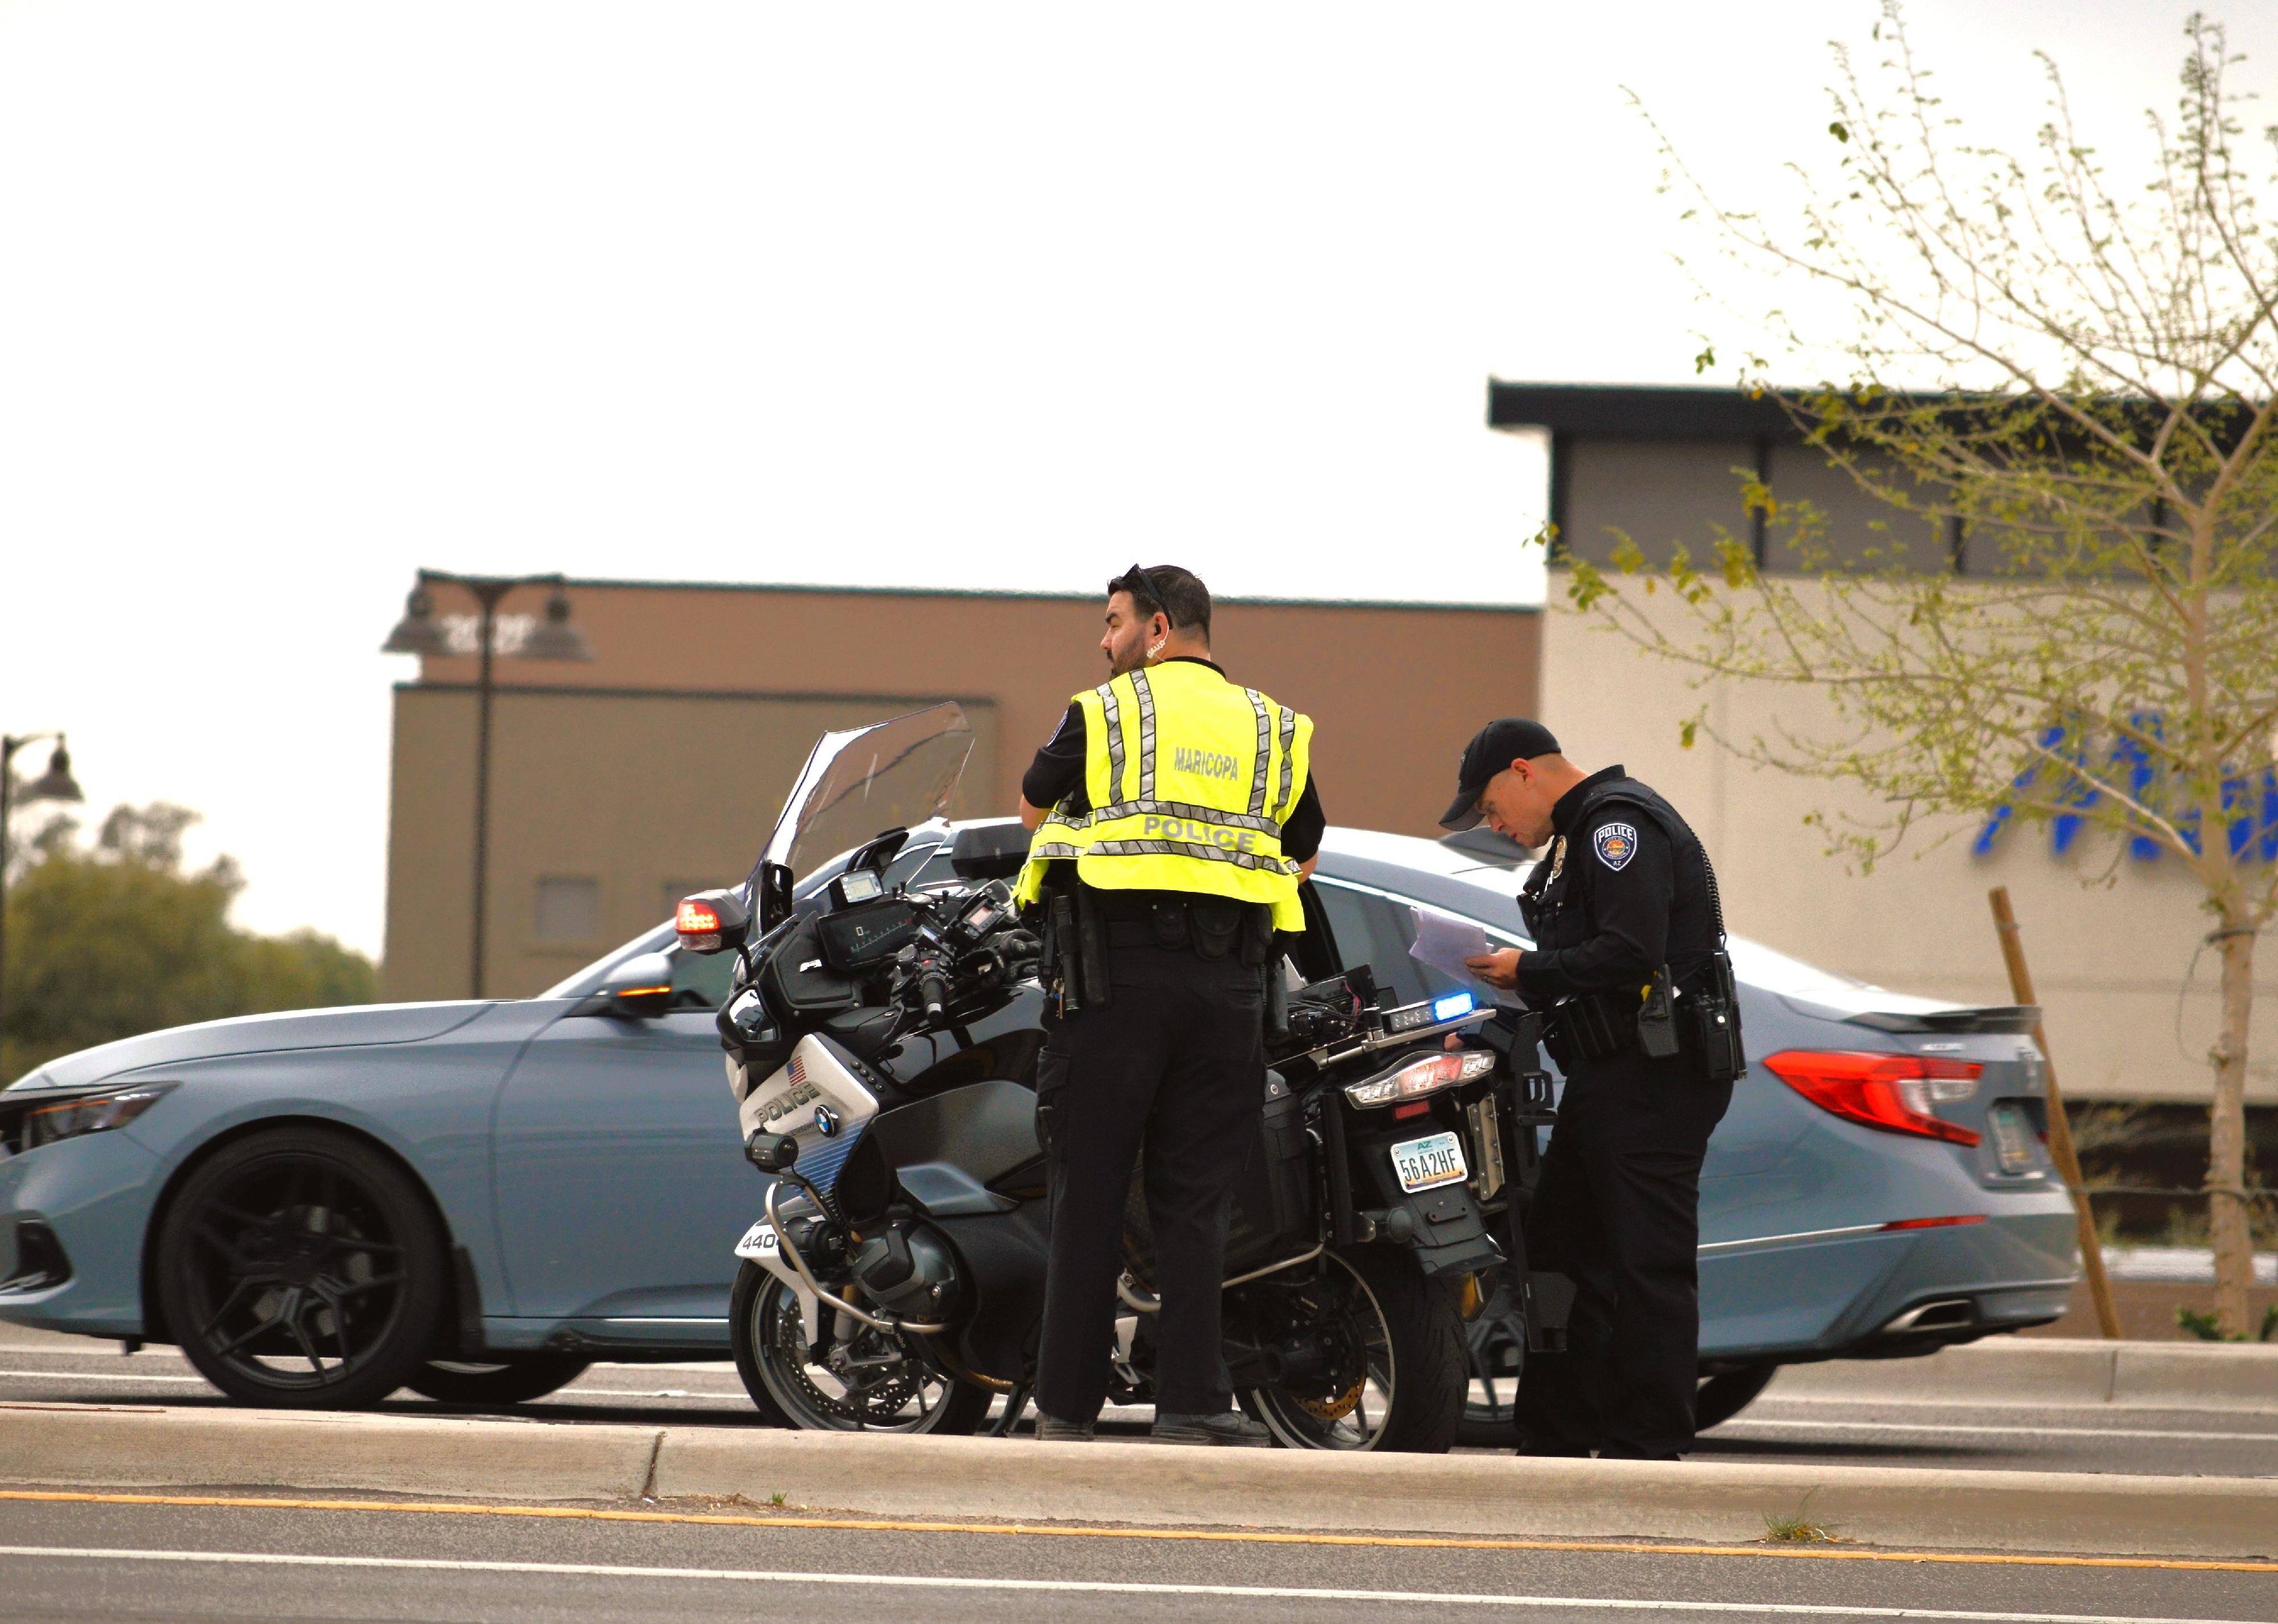 City of Maricopa police officers respond to a traffic accident.